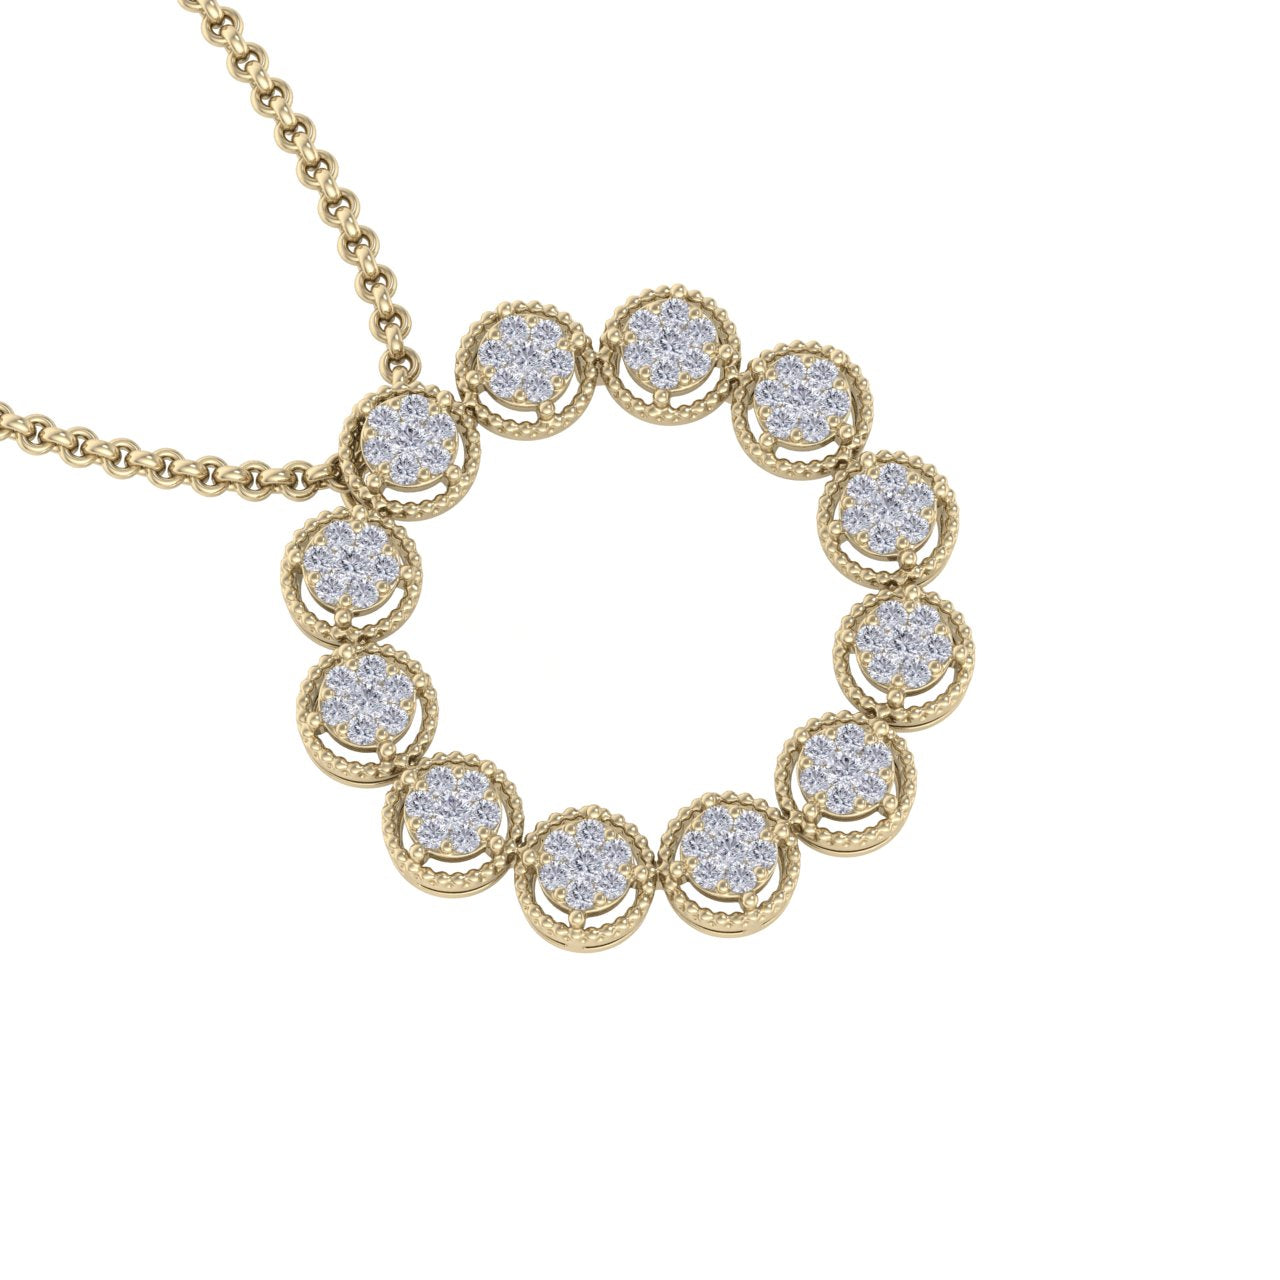 Round pendant in yellow gold with white diamonds of 1.44 ct in weight